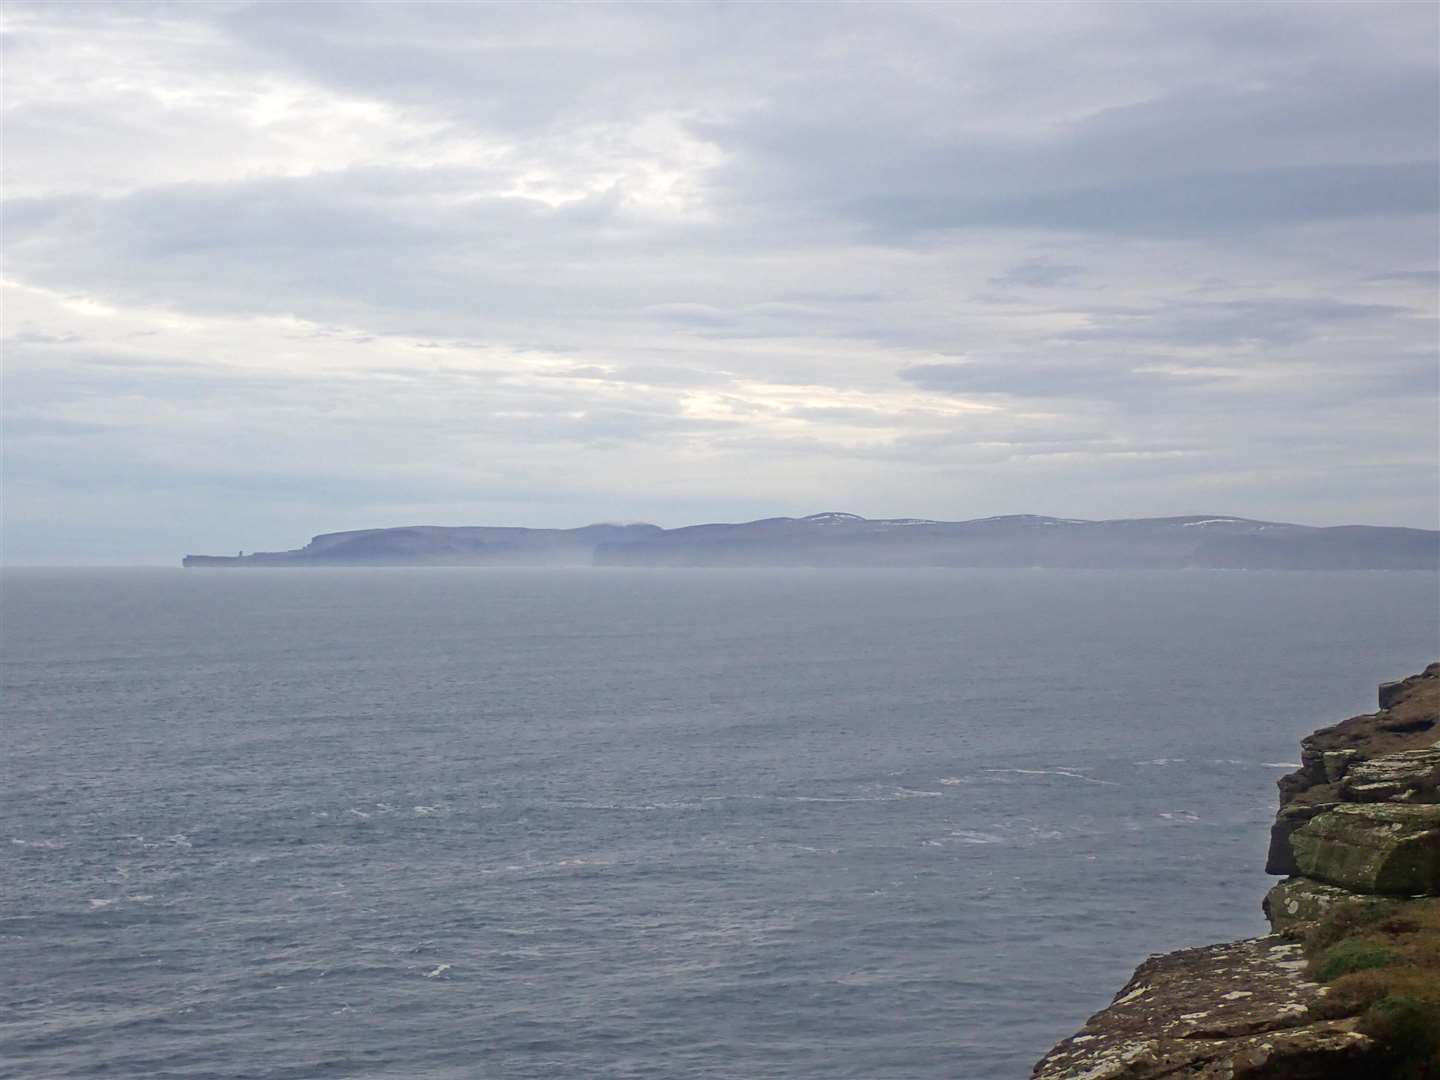 The view to Hoy from Dunnet Head.